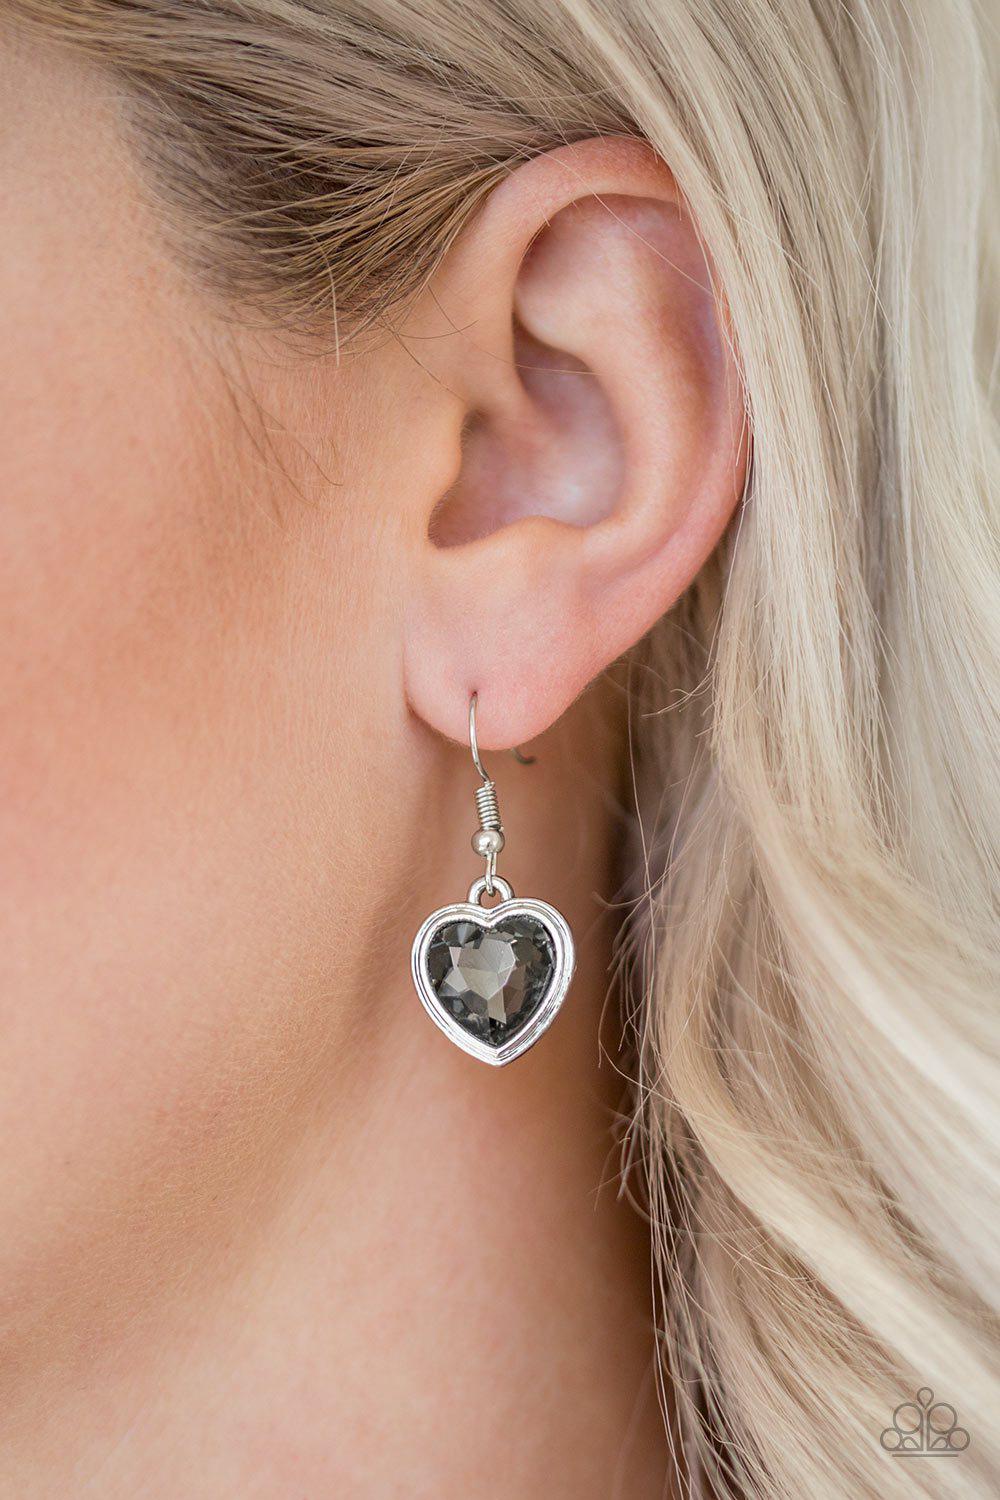 Real Romance Silver Smoky Gem Heart Earrings - Paparazzi Accessories-CarasShop.com - $5 Jewelry by Cara Jewels